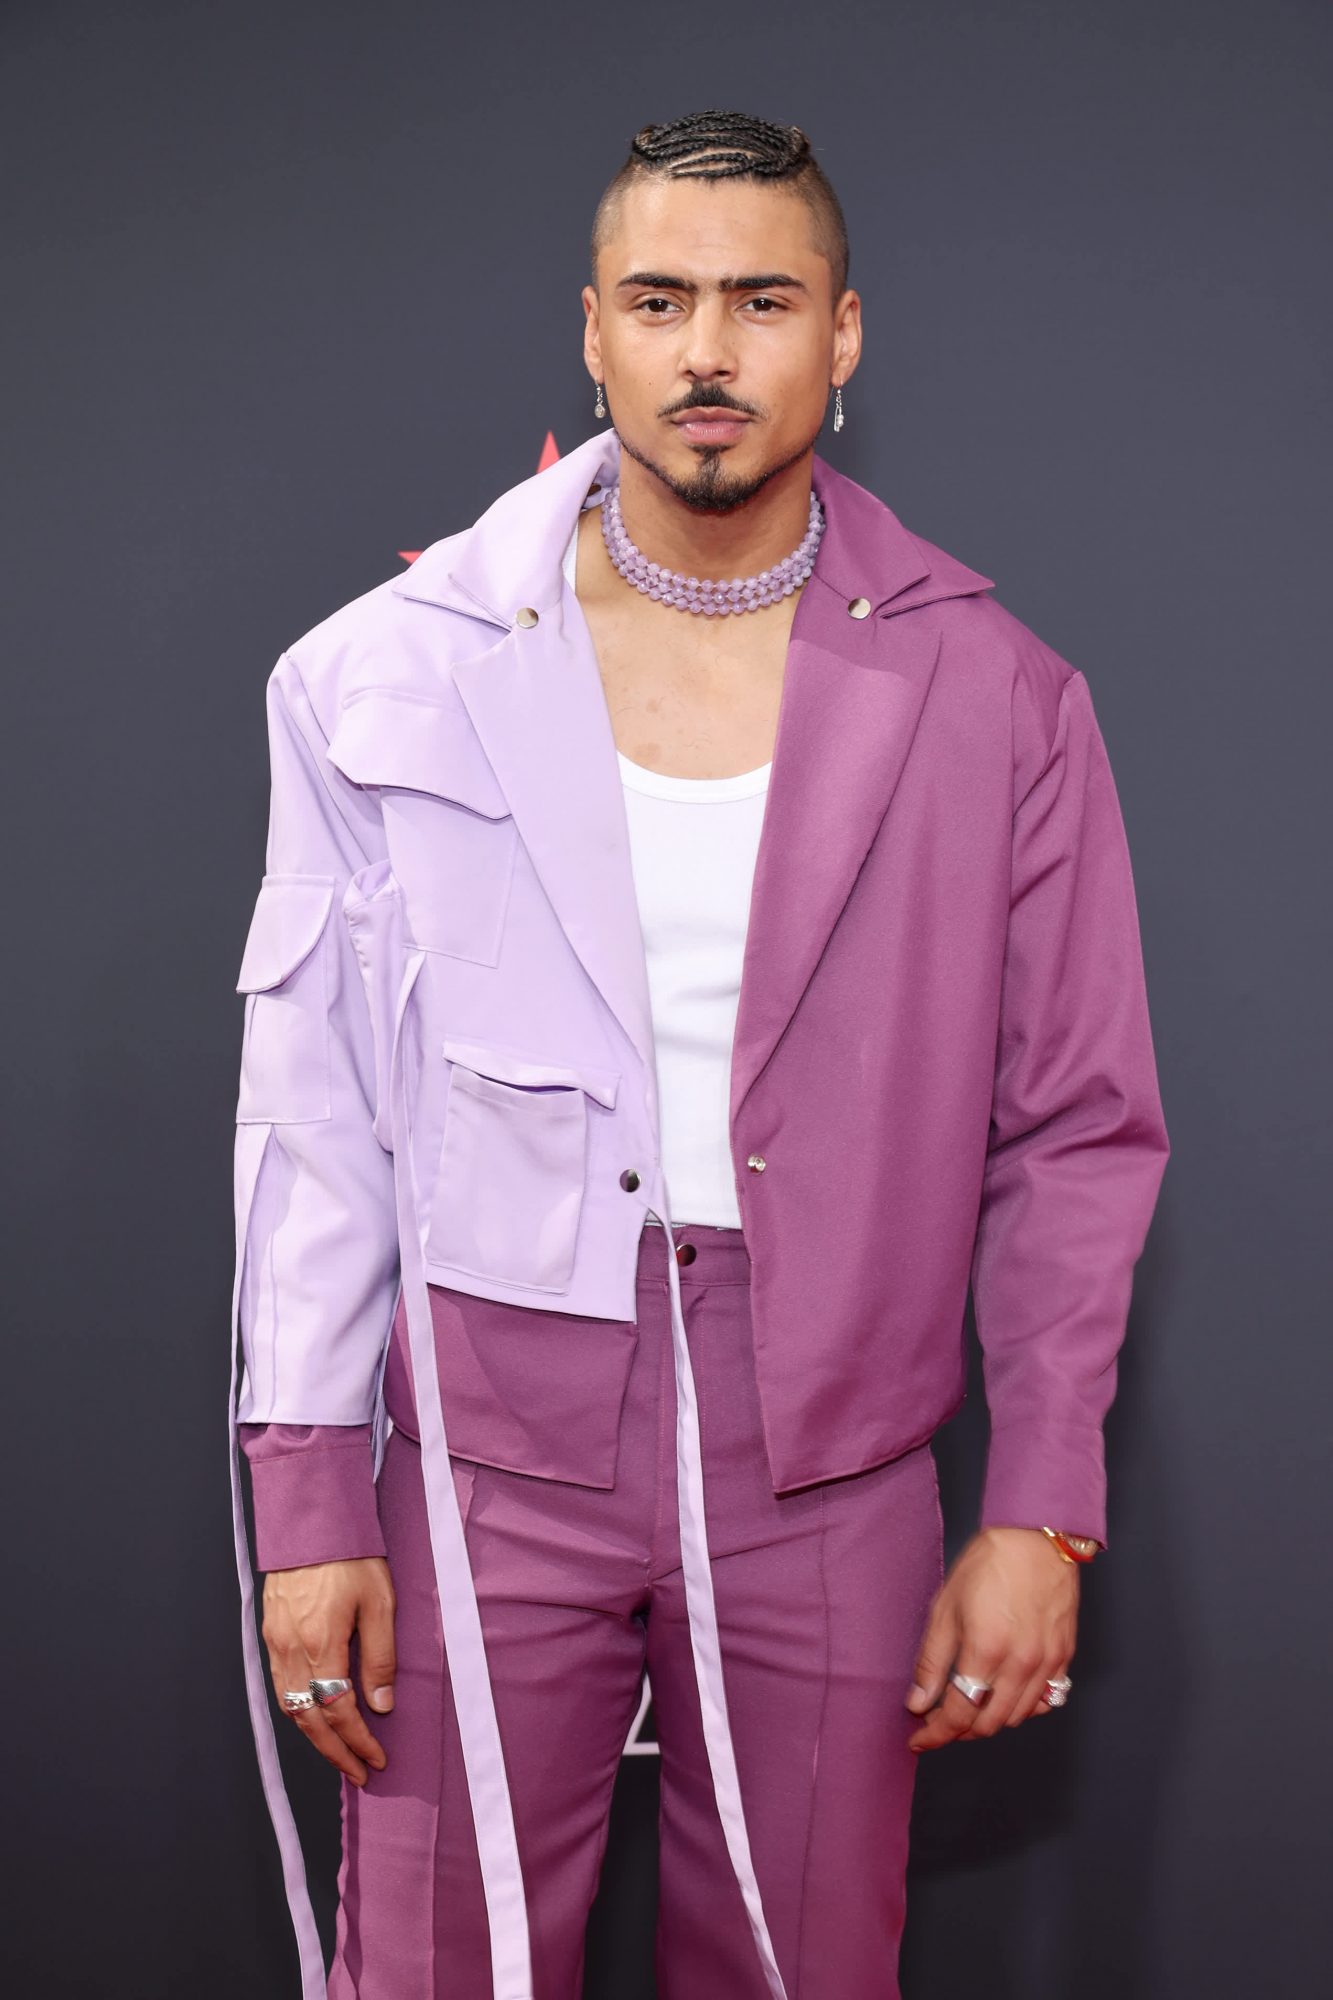 Quincy Brown attends the 2022 BET Awards at Microsoft Theater on June 26, 2022